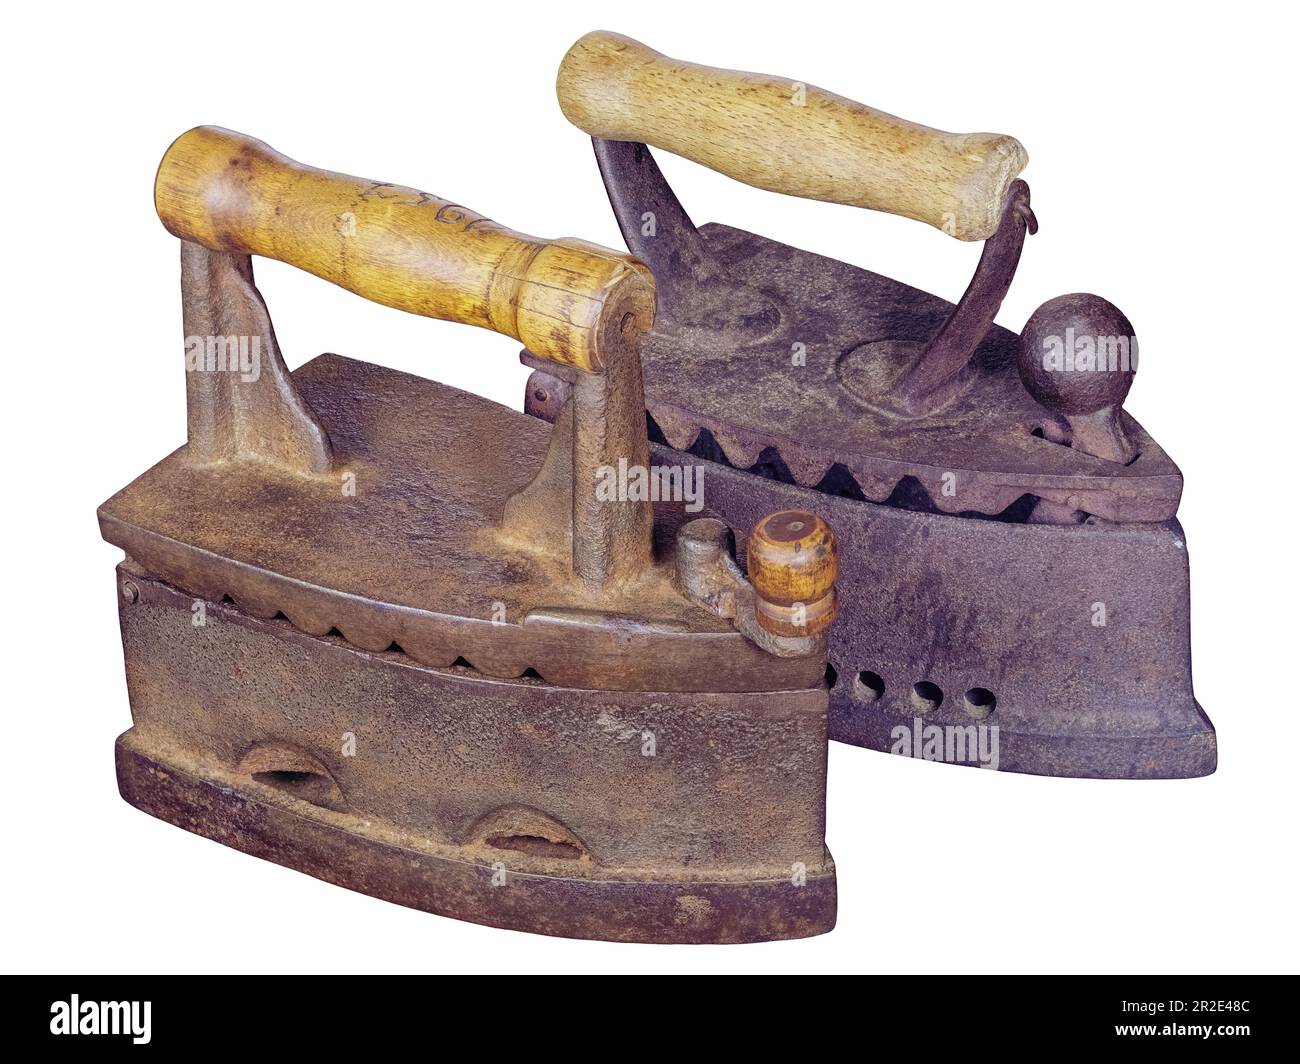 Two old rusty charcoal smoothing irons isolated on white background Stock Photo